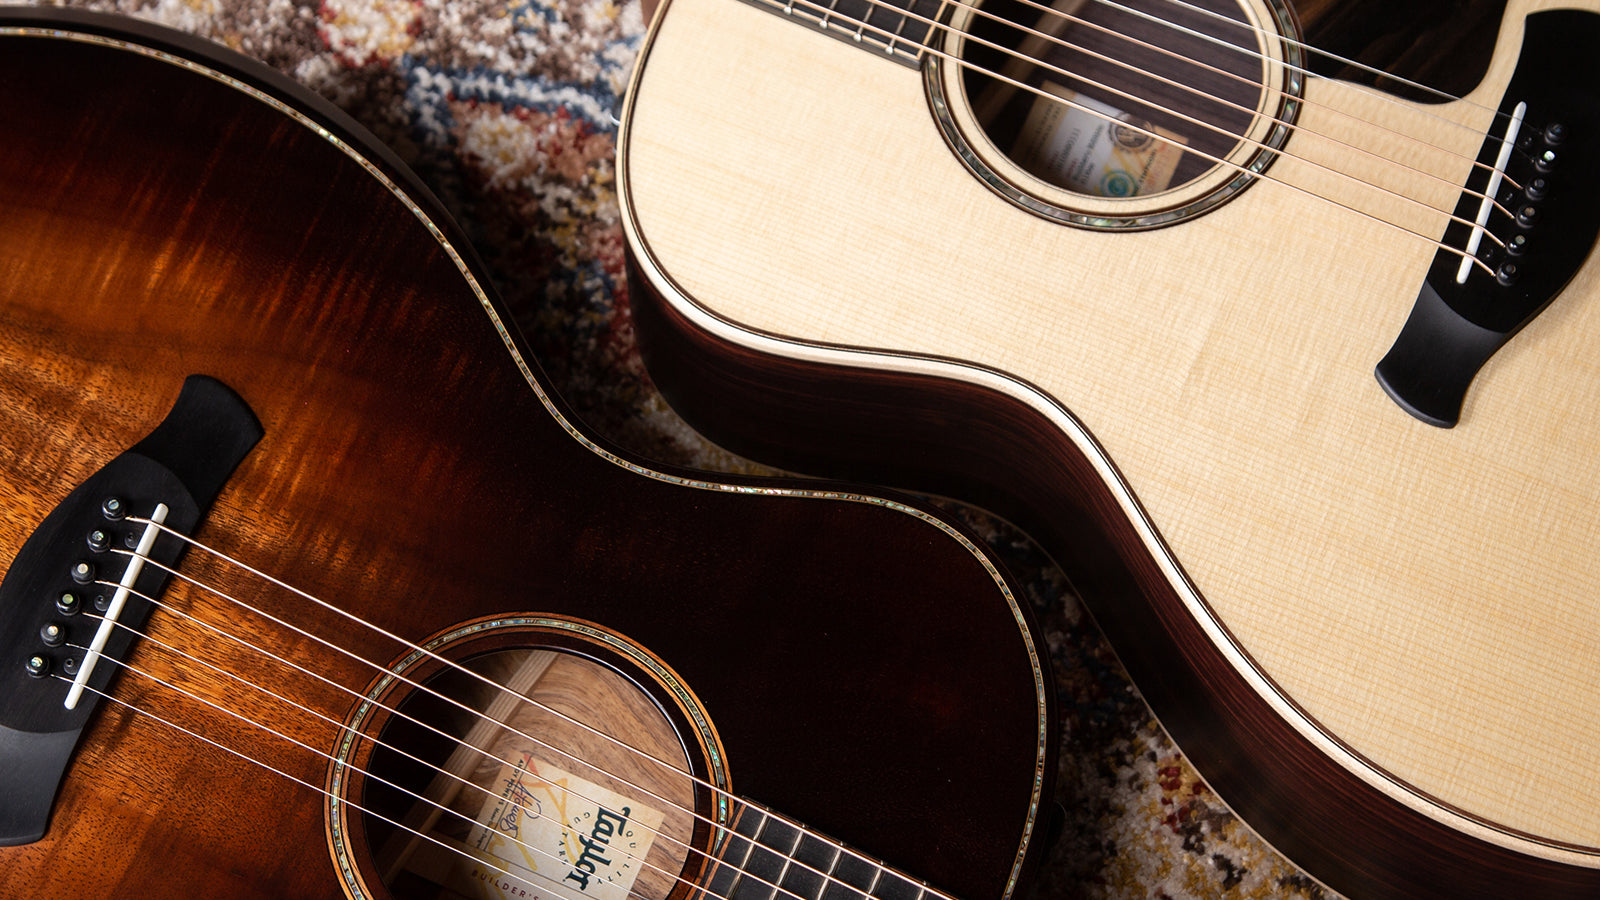 Two Taylor guitars laying on a stylish rug